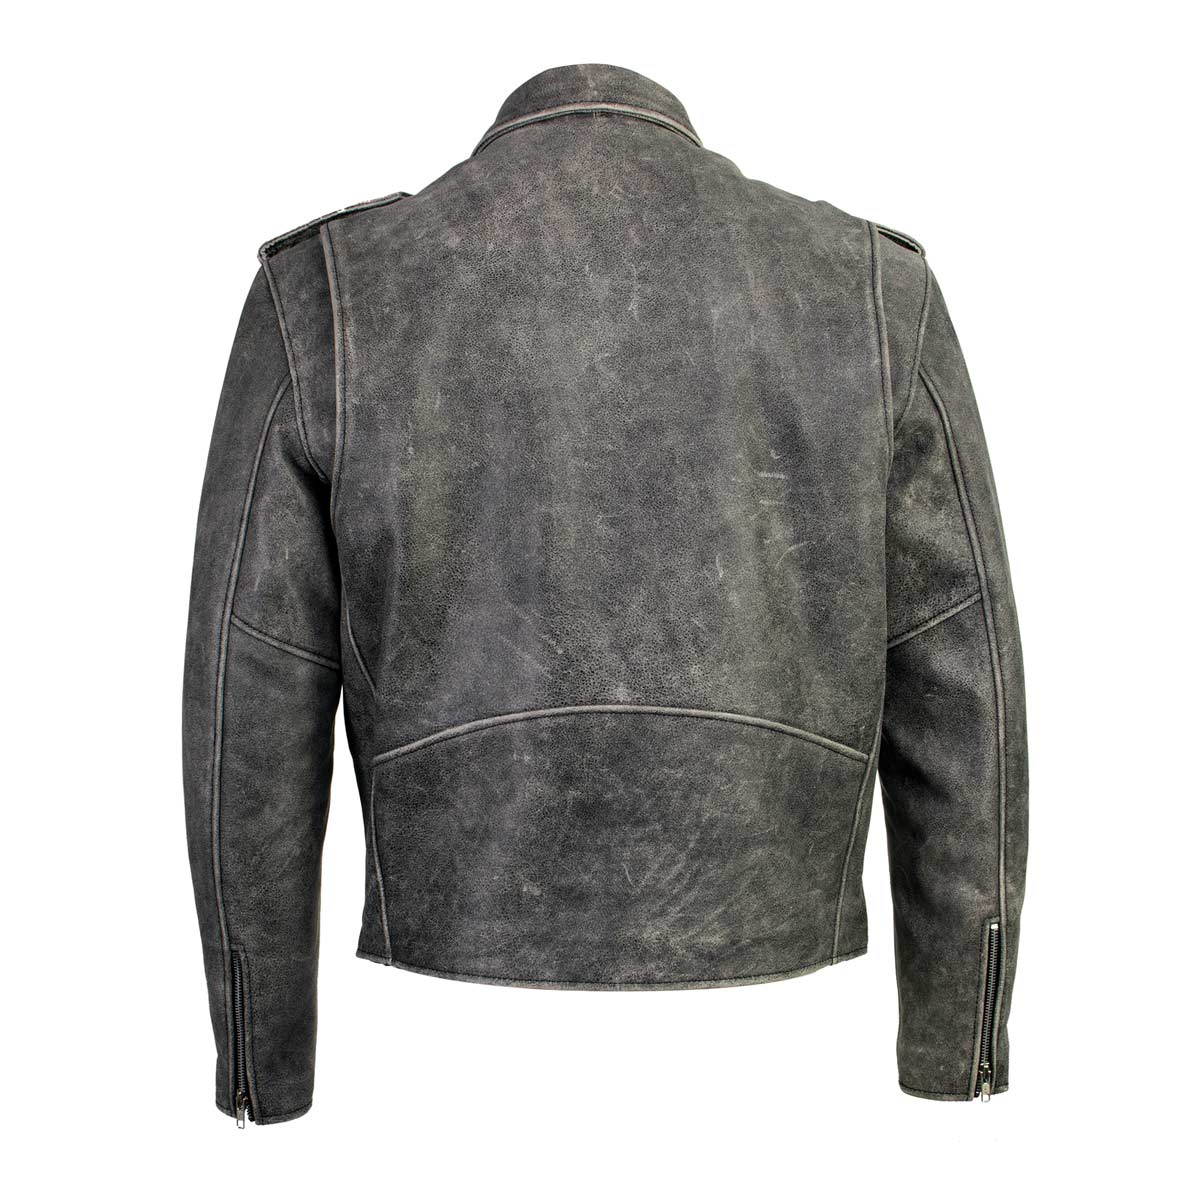 Xelement B7149 Men's 'Sliver' Distressed Gray Classic Motorcycle